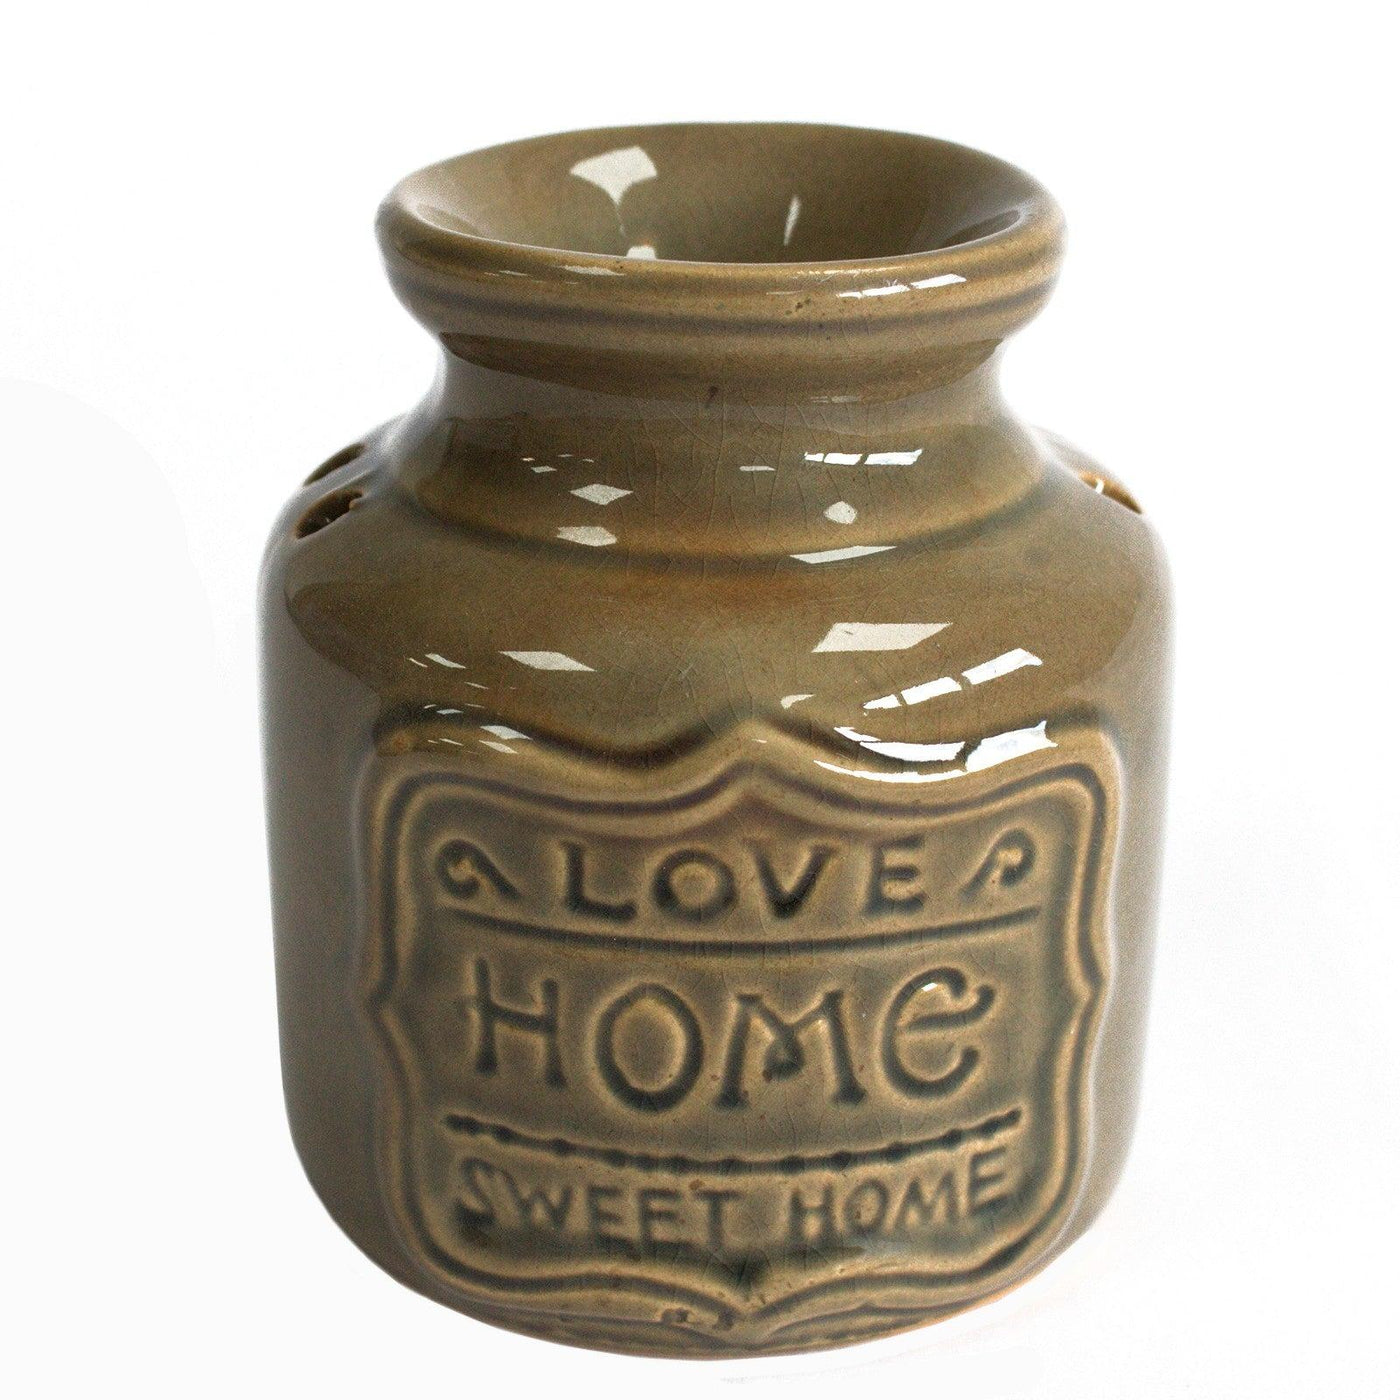 Blue Stone Ceramic Vintage Country Oil And Wax Melts Burner - Love Home, Sweet Home.